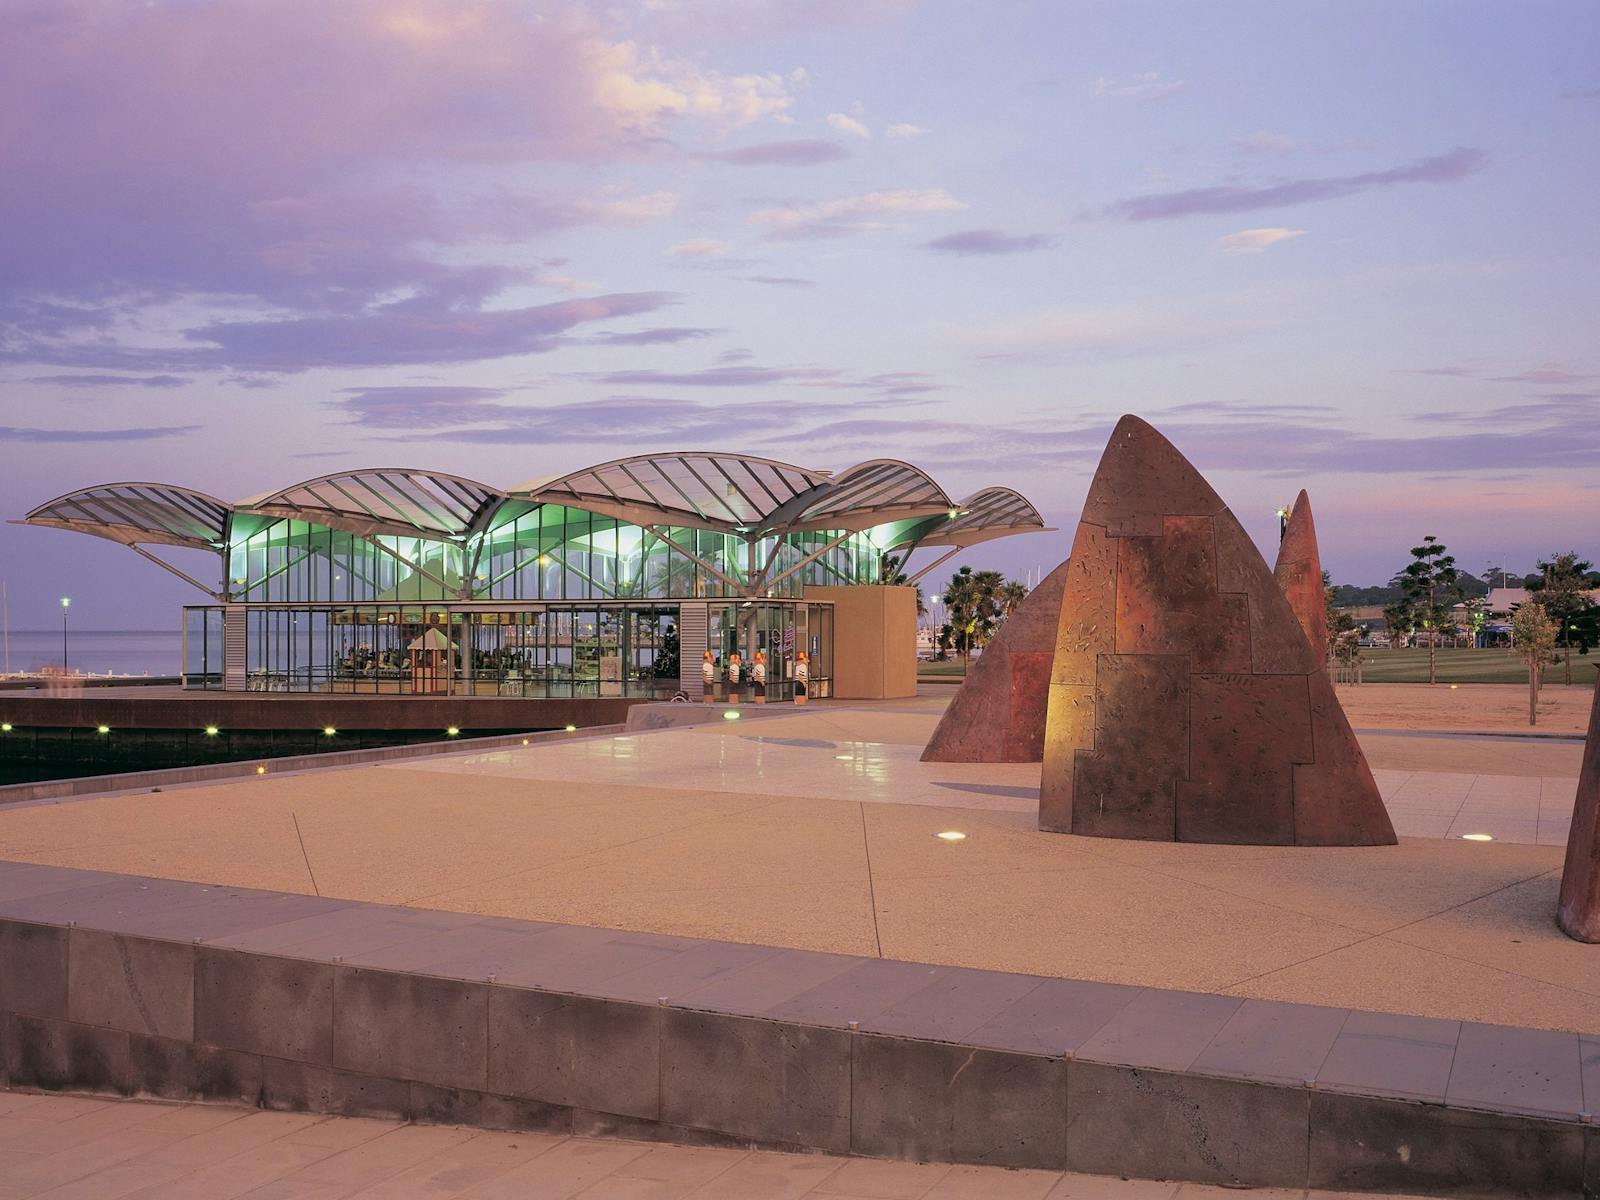 A photo of The Carousel and North sculpture on the Waterfront at sunset.